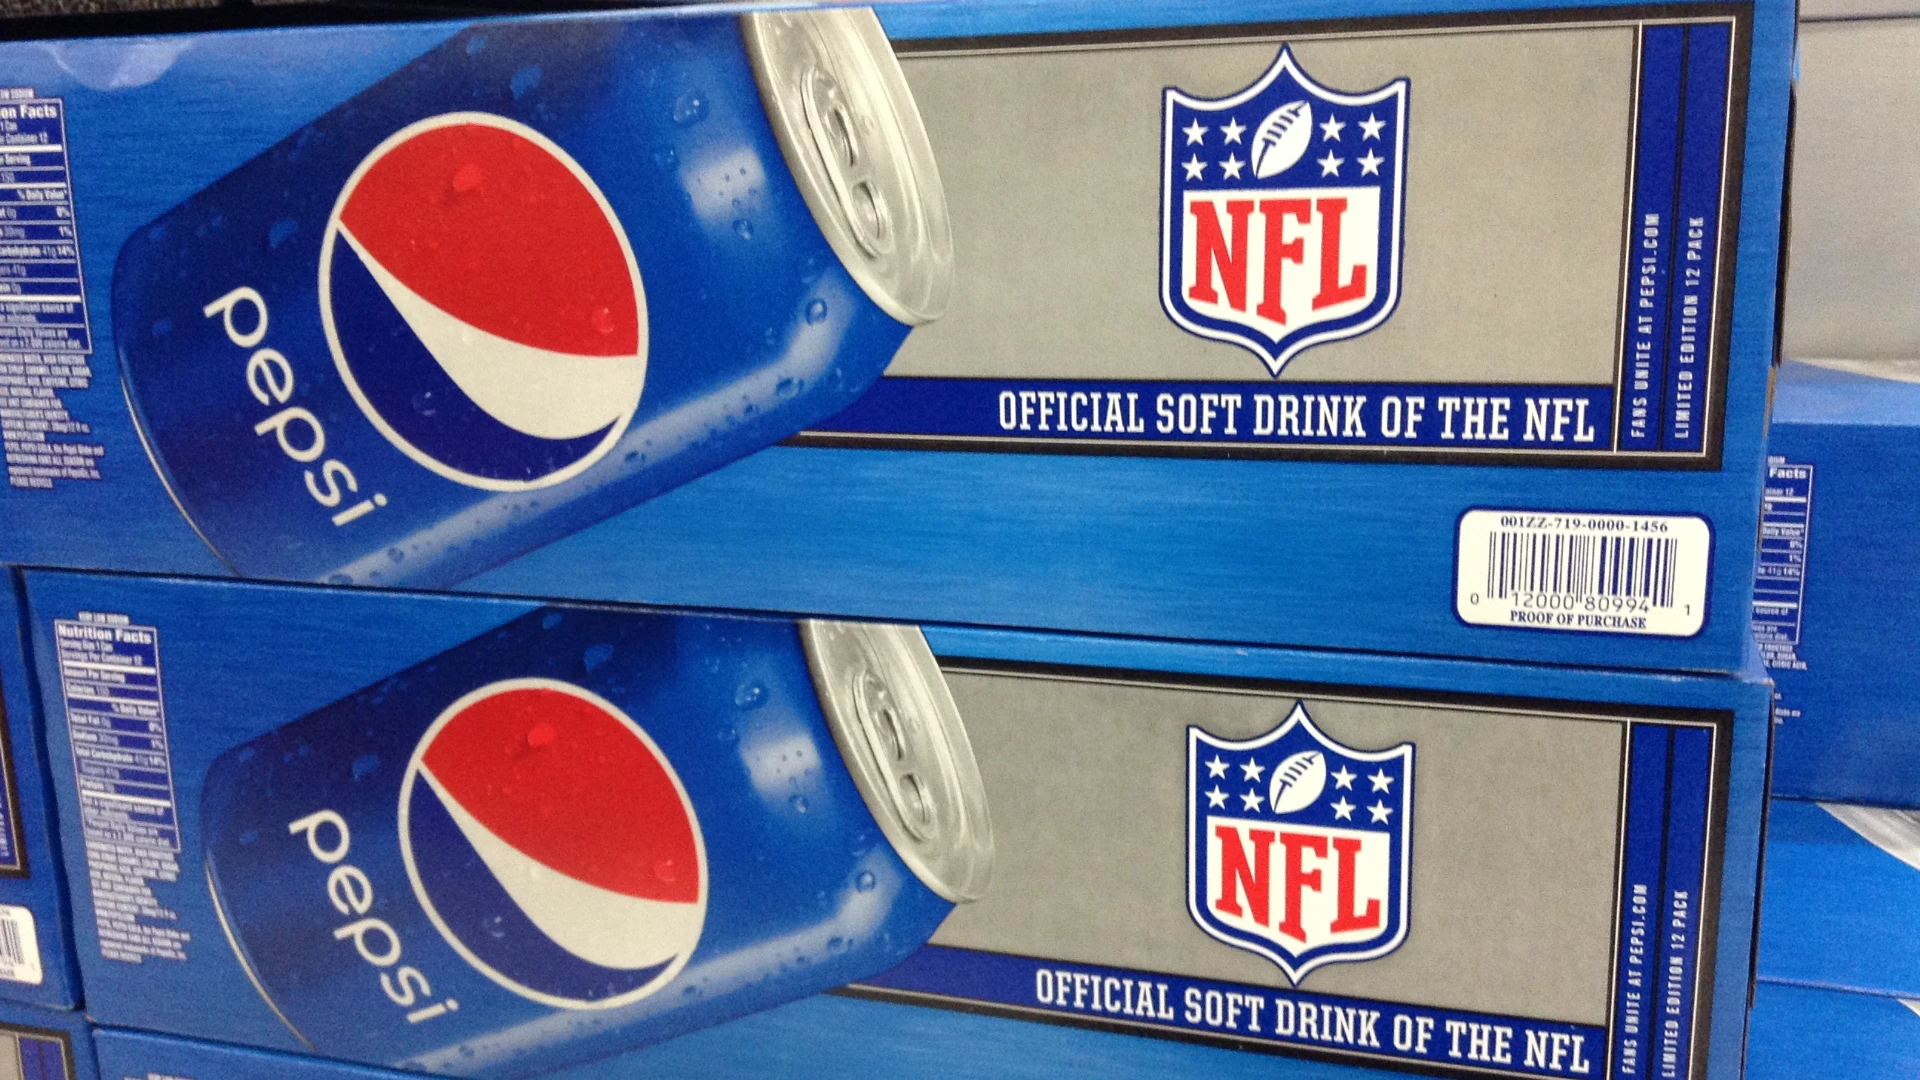 NFL official on Pepsi cans